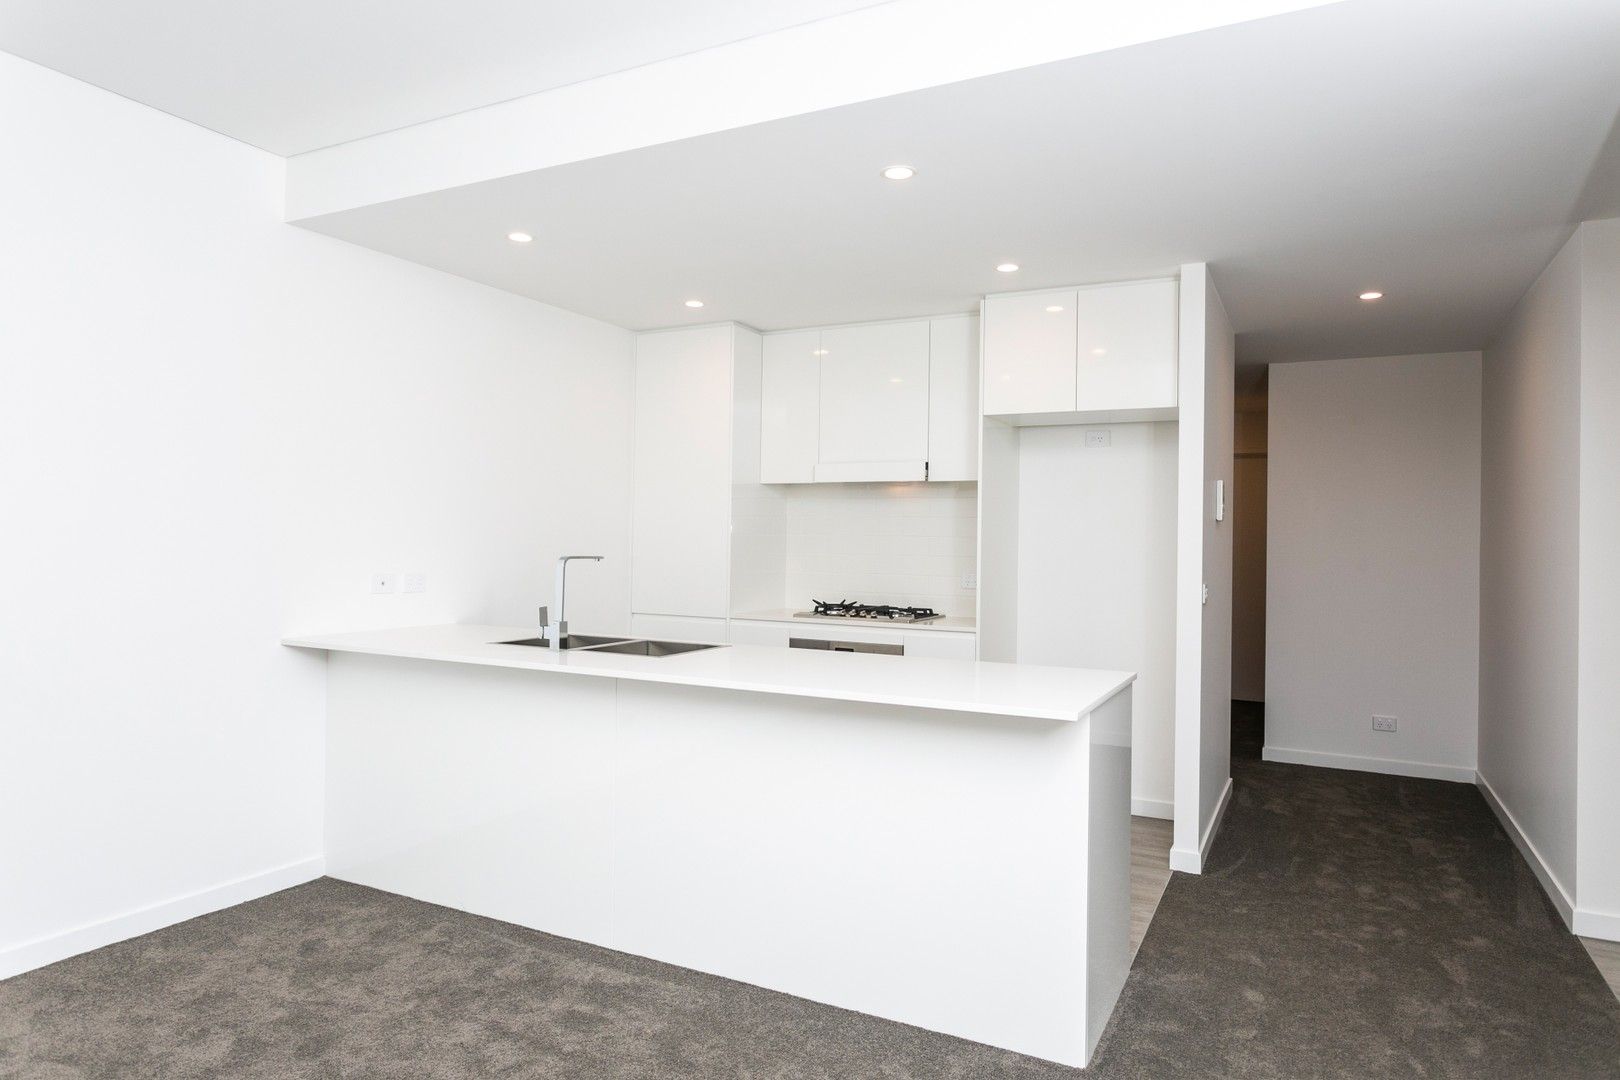 106/1 Evelyn Court, Shellharbour City Centre NSW 2529, Image 1